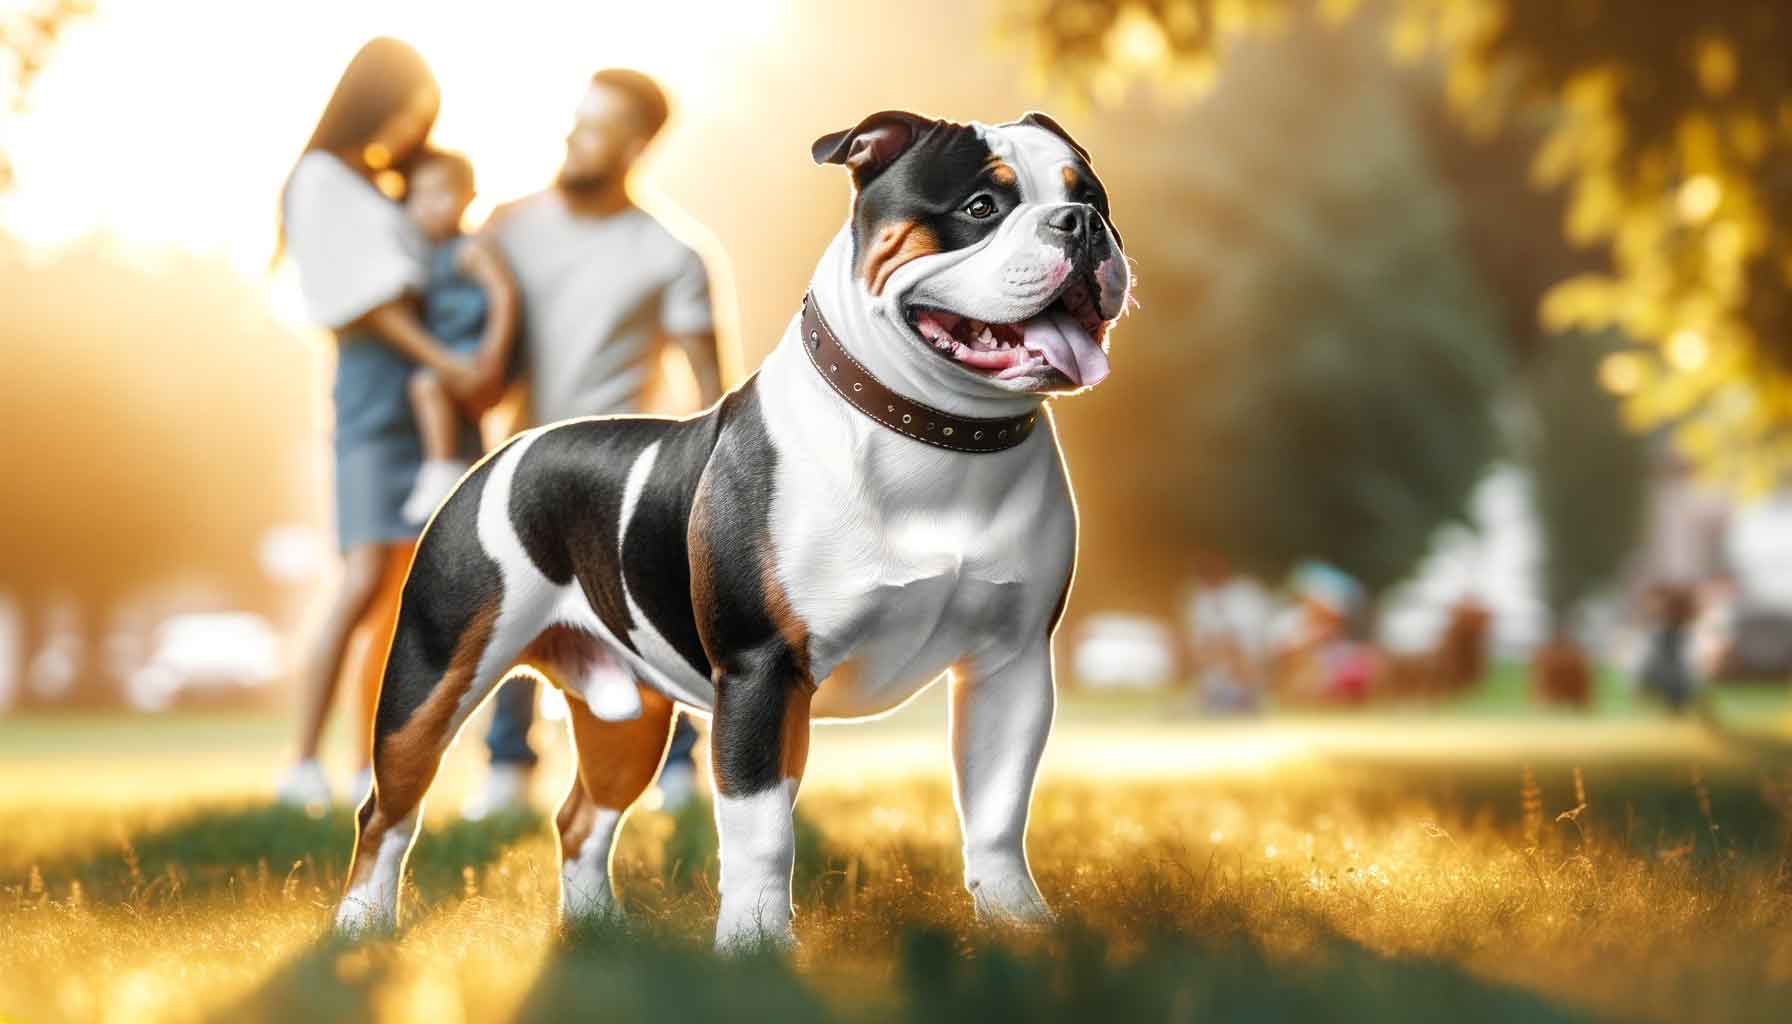 A tri-color American Bully stands in a sunlit park, its glossy white, black, and tan coat shining in the sunlight, with a family playing in the background, underscoring the dog's role as a beloved family pet.